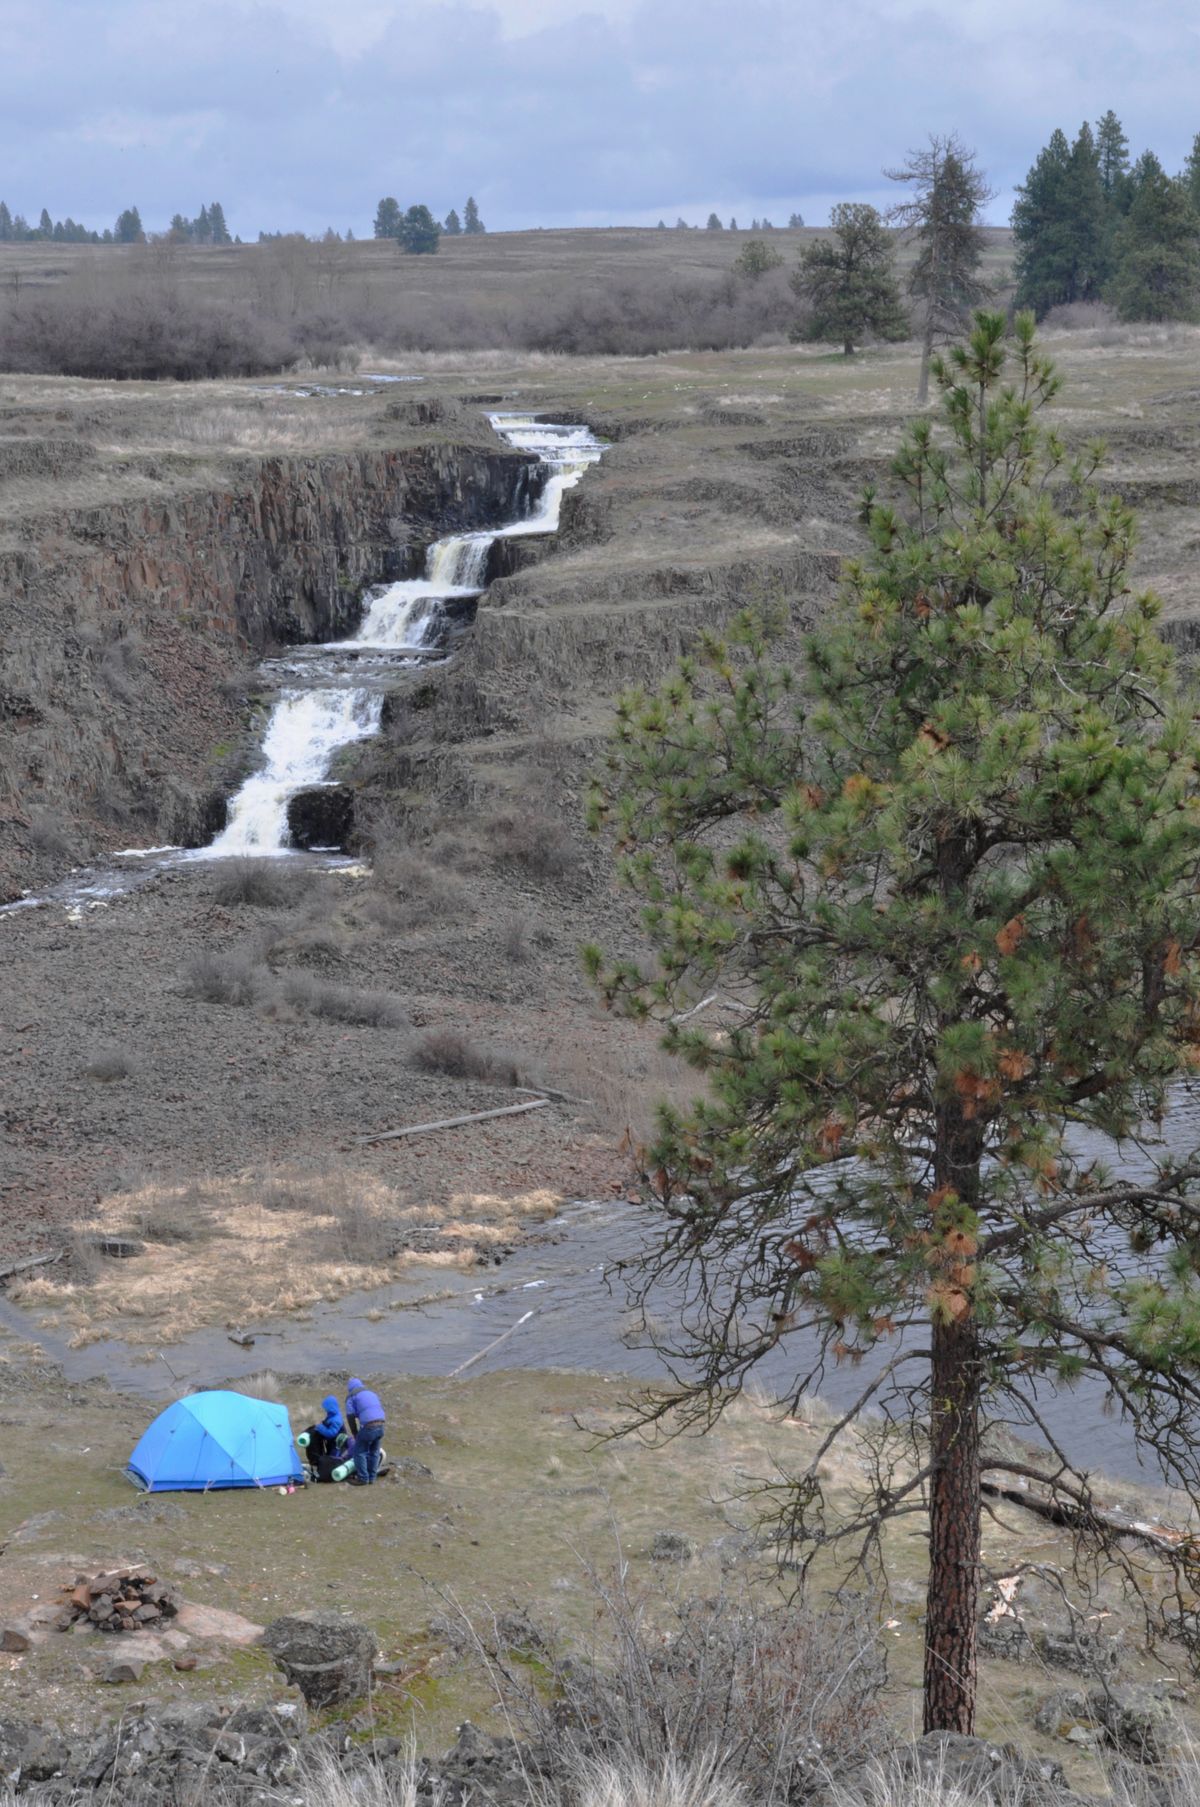 A family of backpackers camp on the BLM land overlooking the waterfall at Hog Canyon Lake. (Rich Landers)